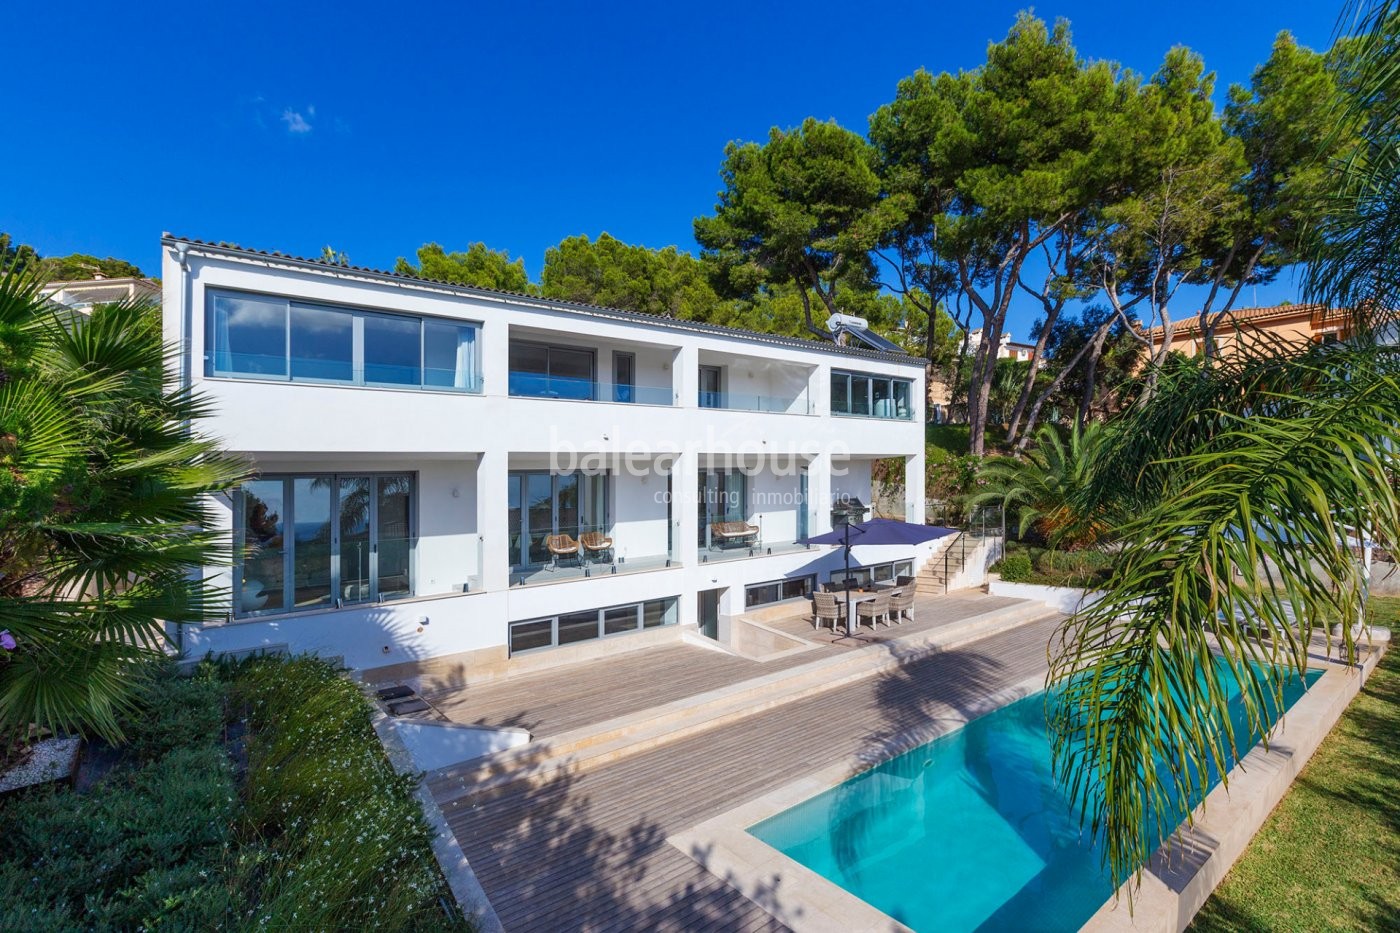 Excellent refurbishment of this villa in Costa d'en Blanes with swimming pool, garden and beautiful